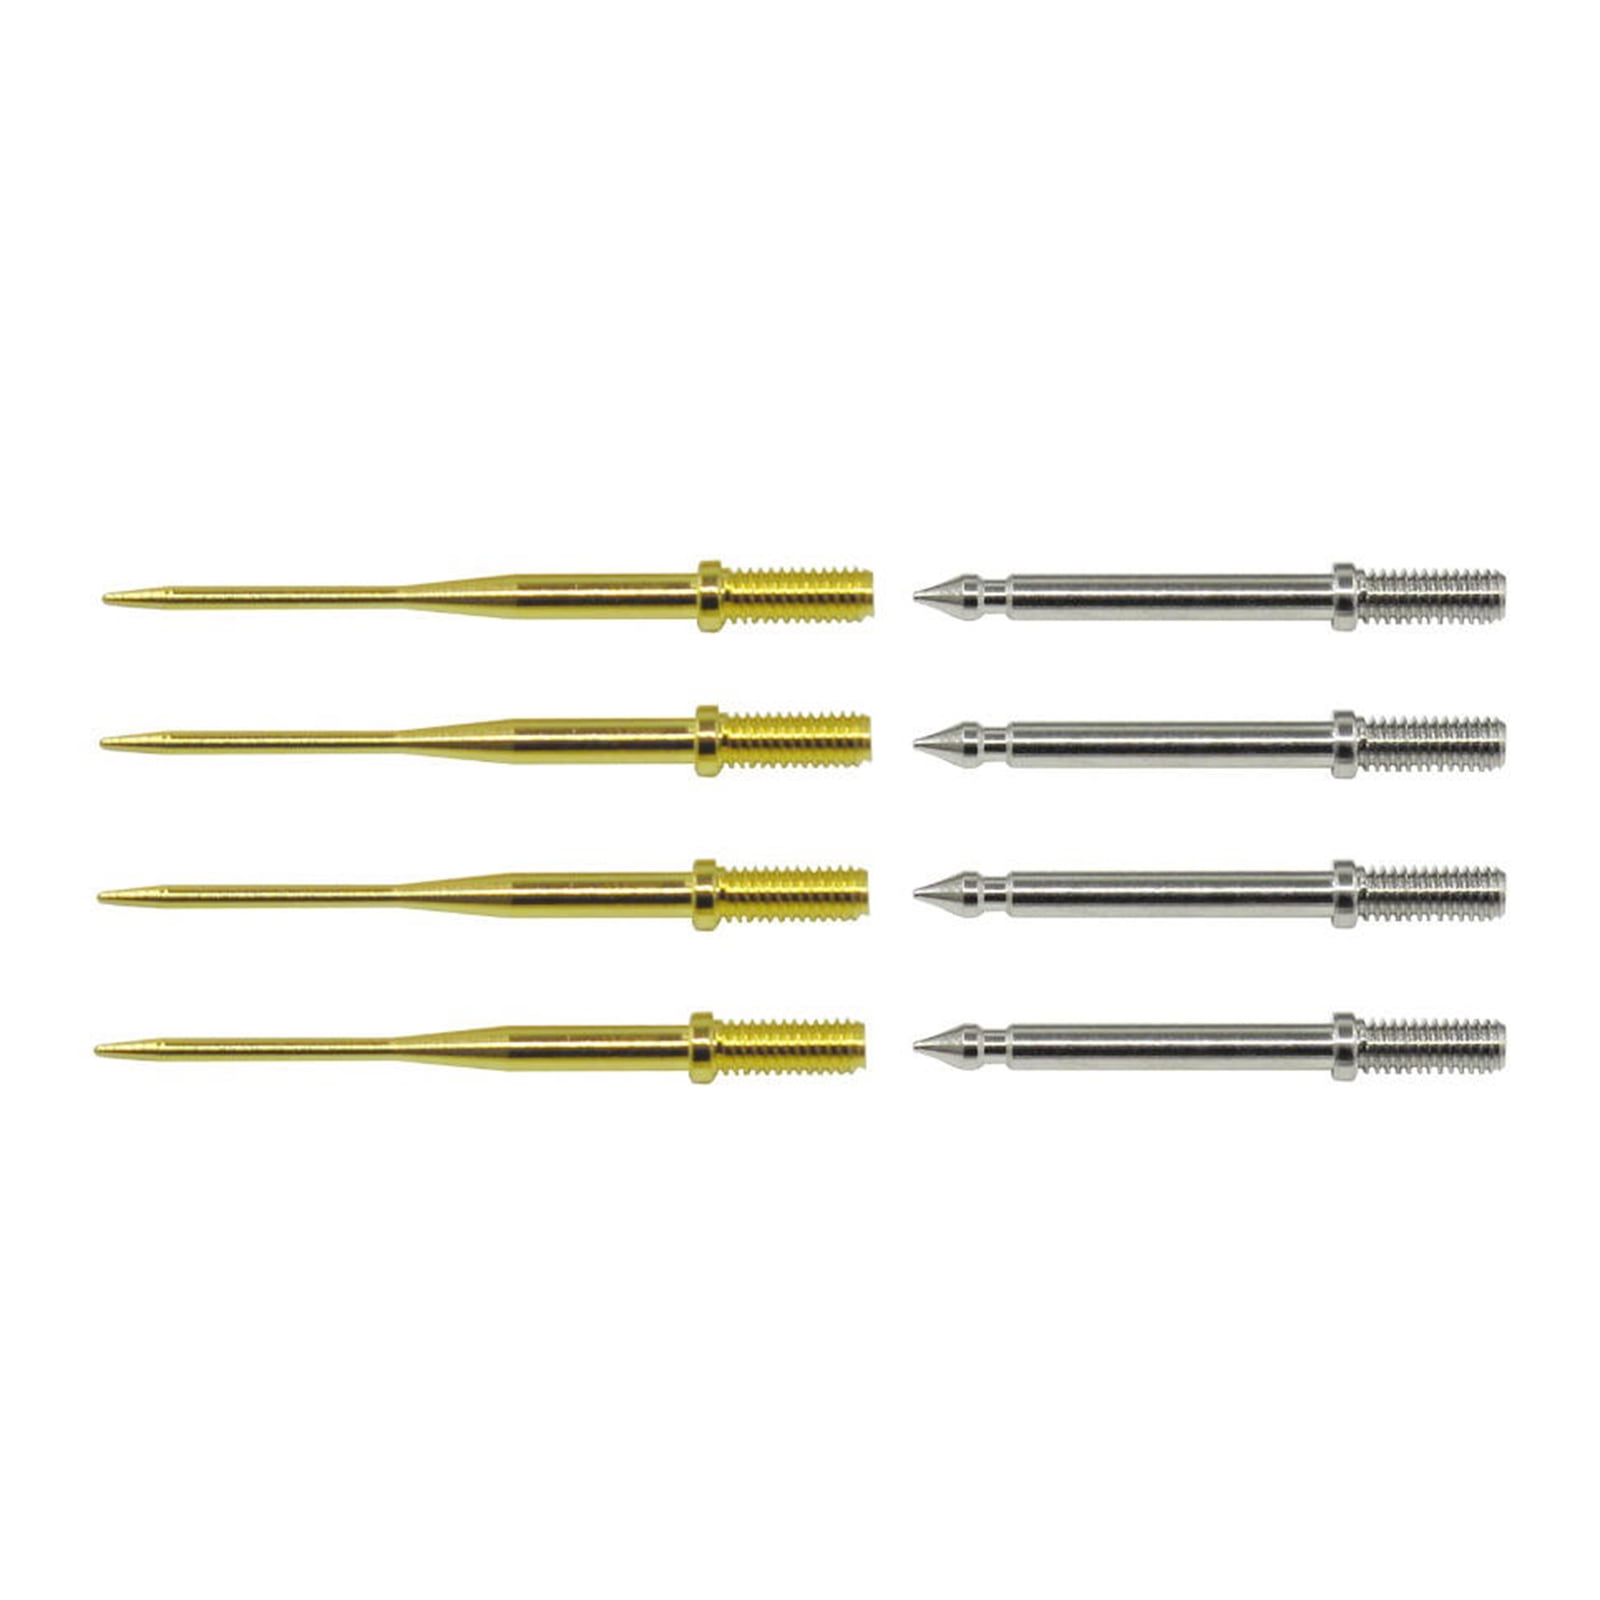 Gilded Needles Test Probes Tool Copper HDPE P8001 2pcs 1000V/20A For Multimeter 